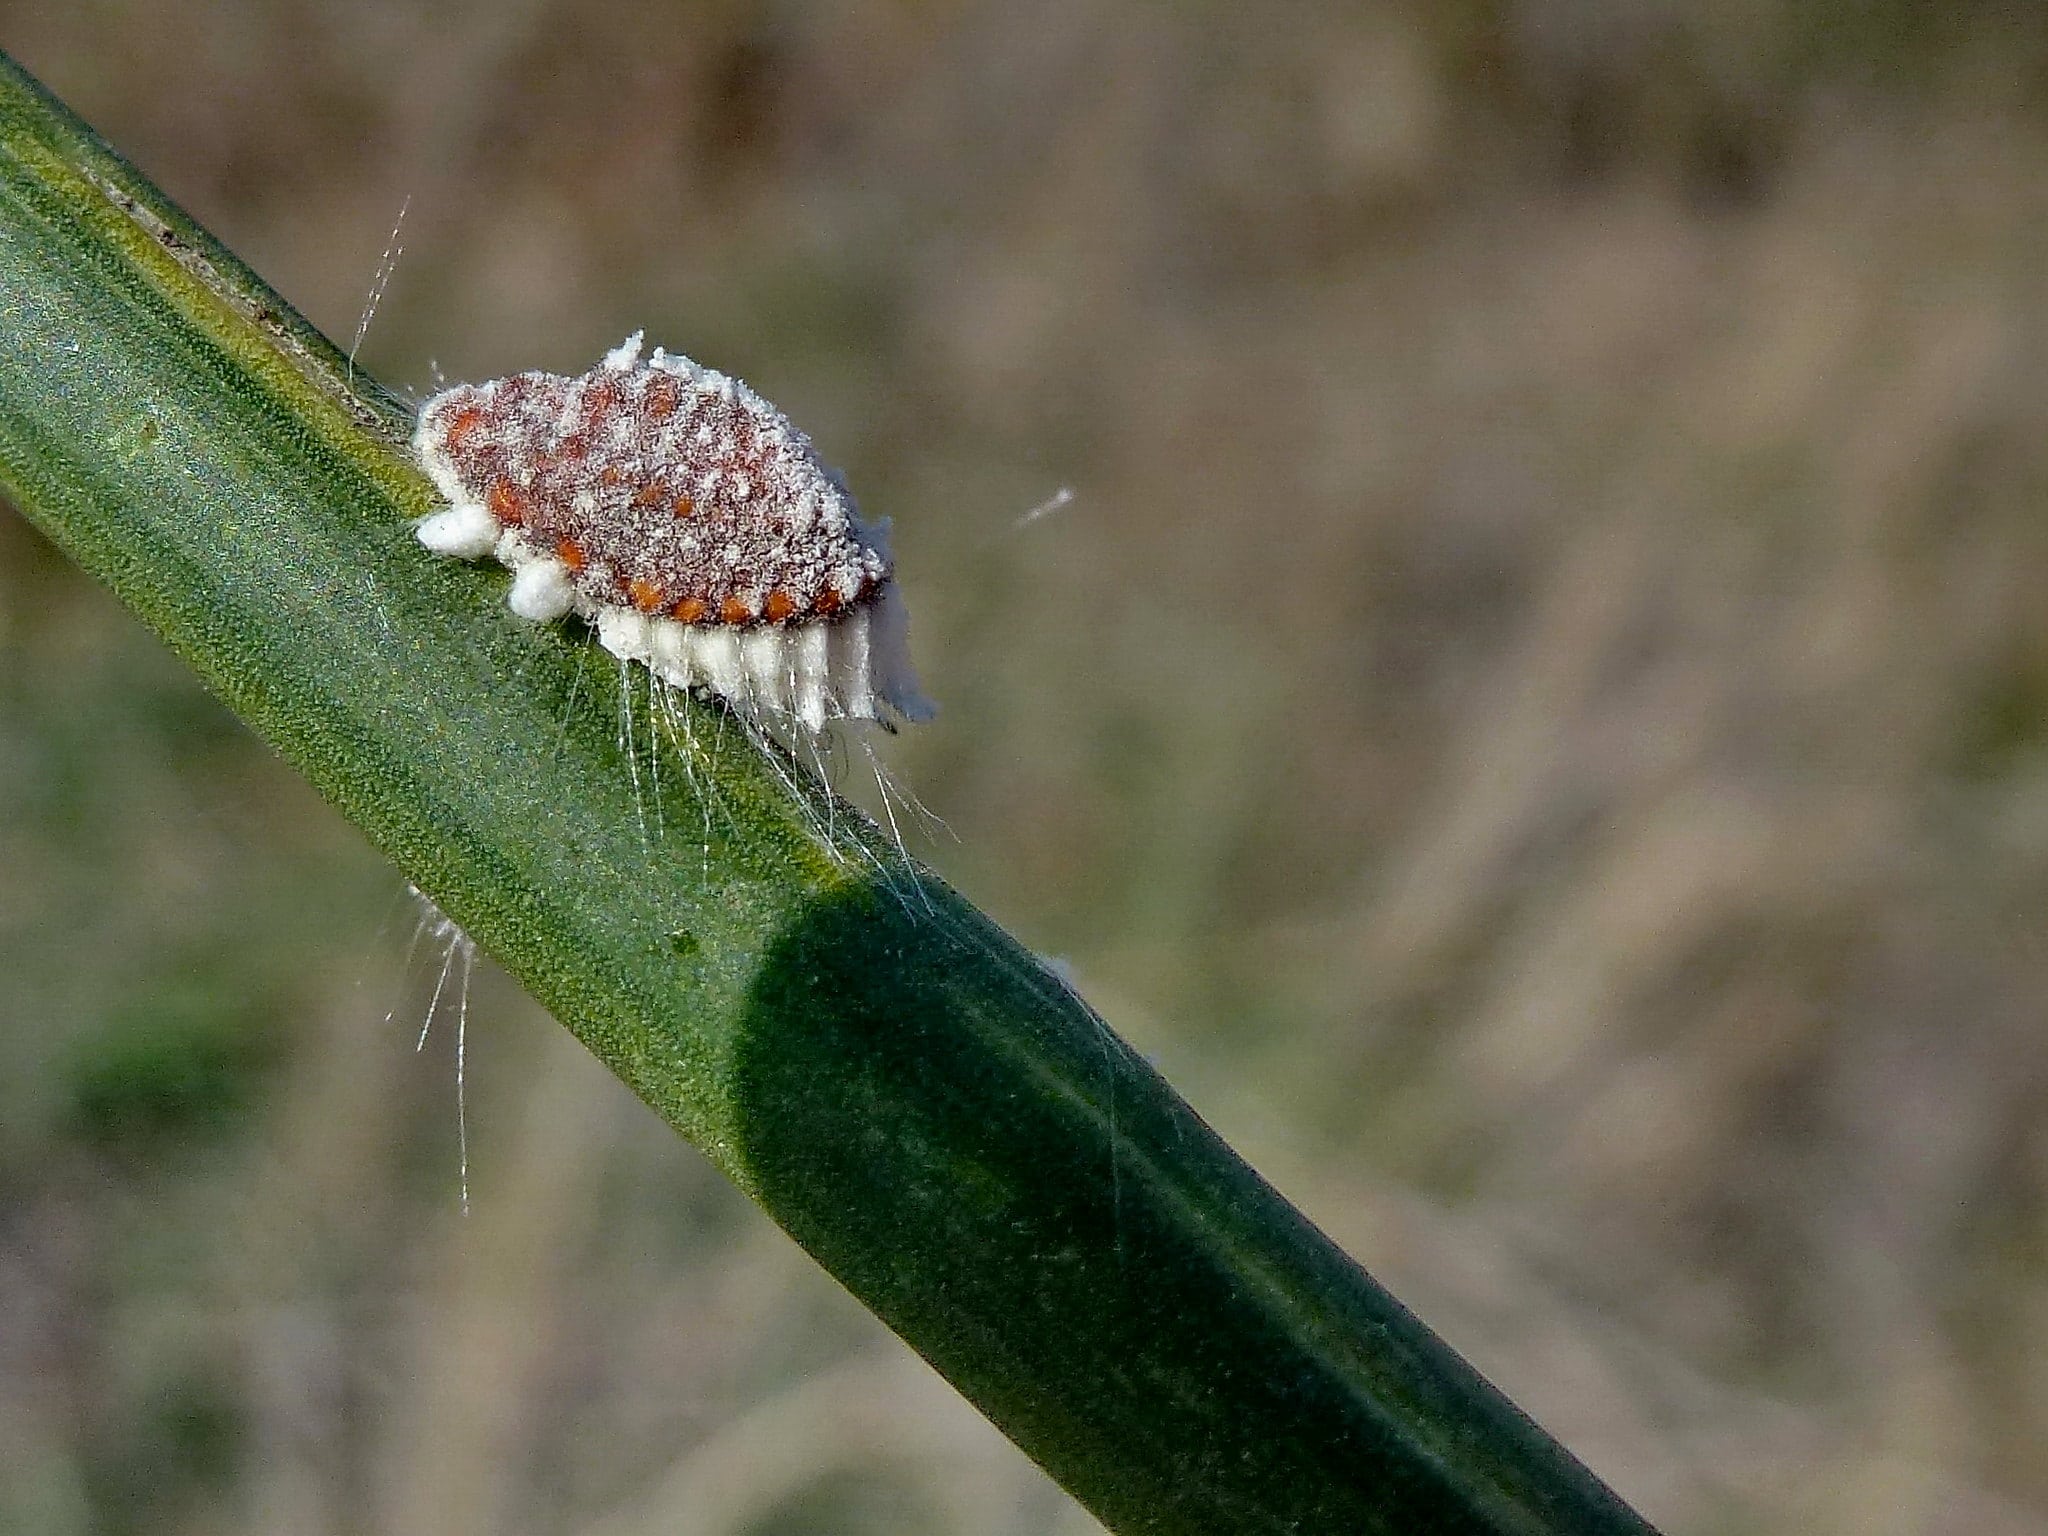 The ribbed mealybug is one of the most frequent pests of the orange tree